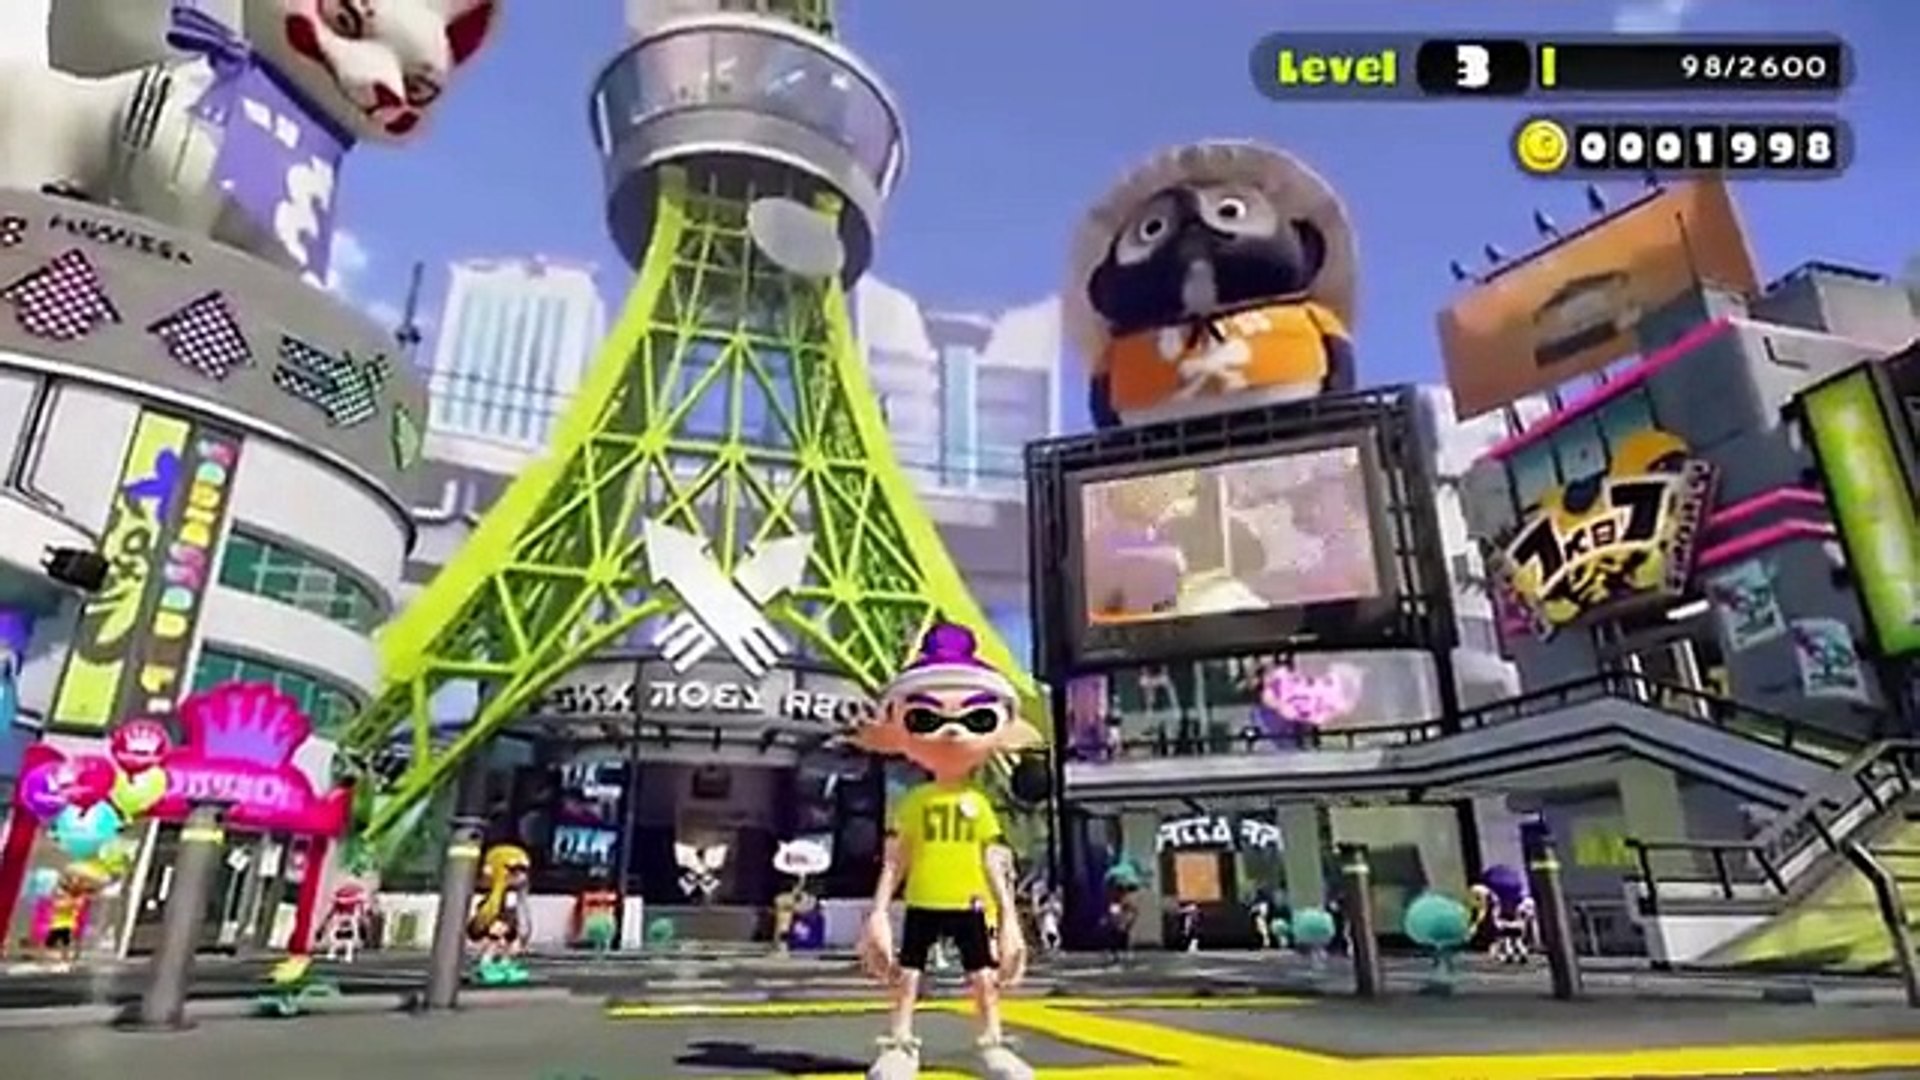 How to Download Splatoon for PC-MAC (Wii Emulated) - video Dailymotion